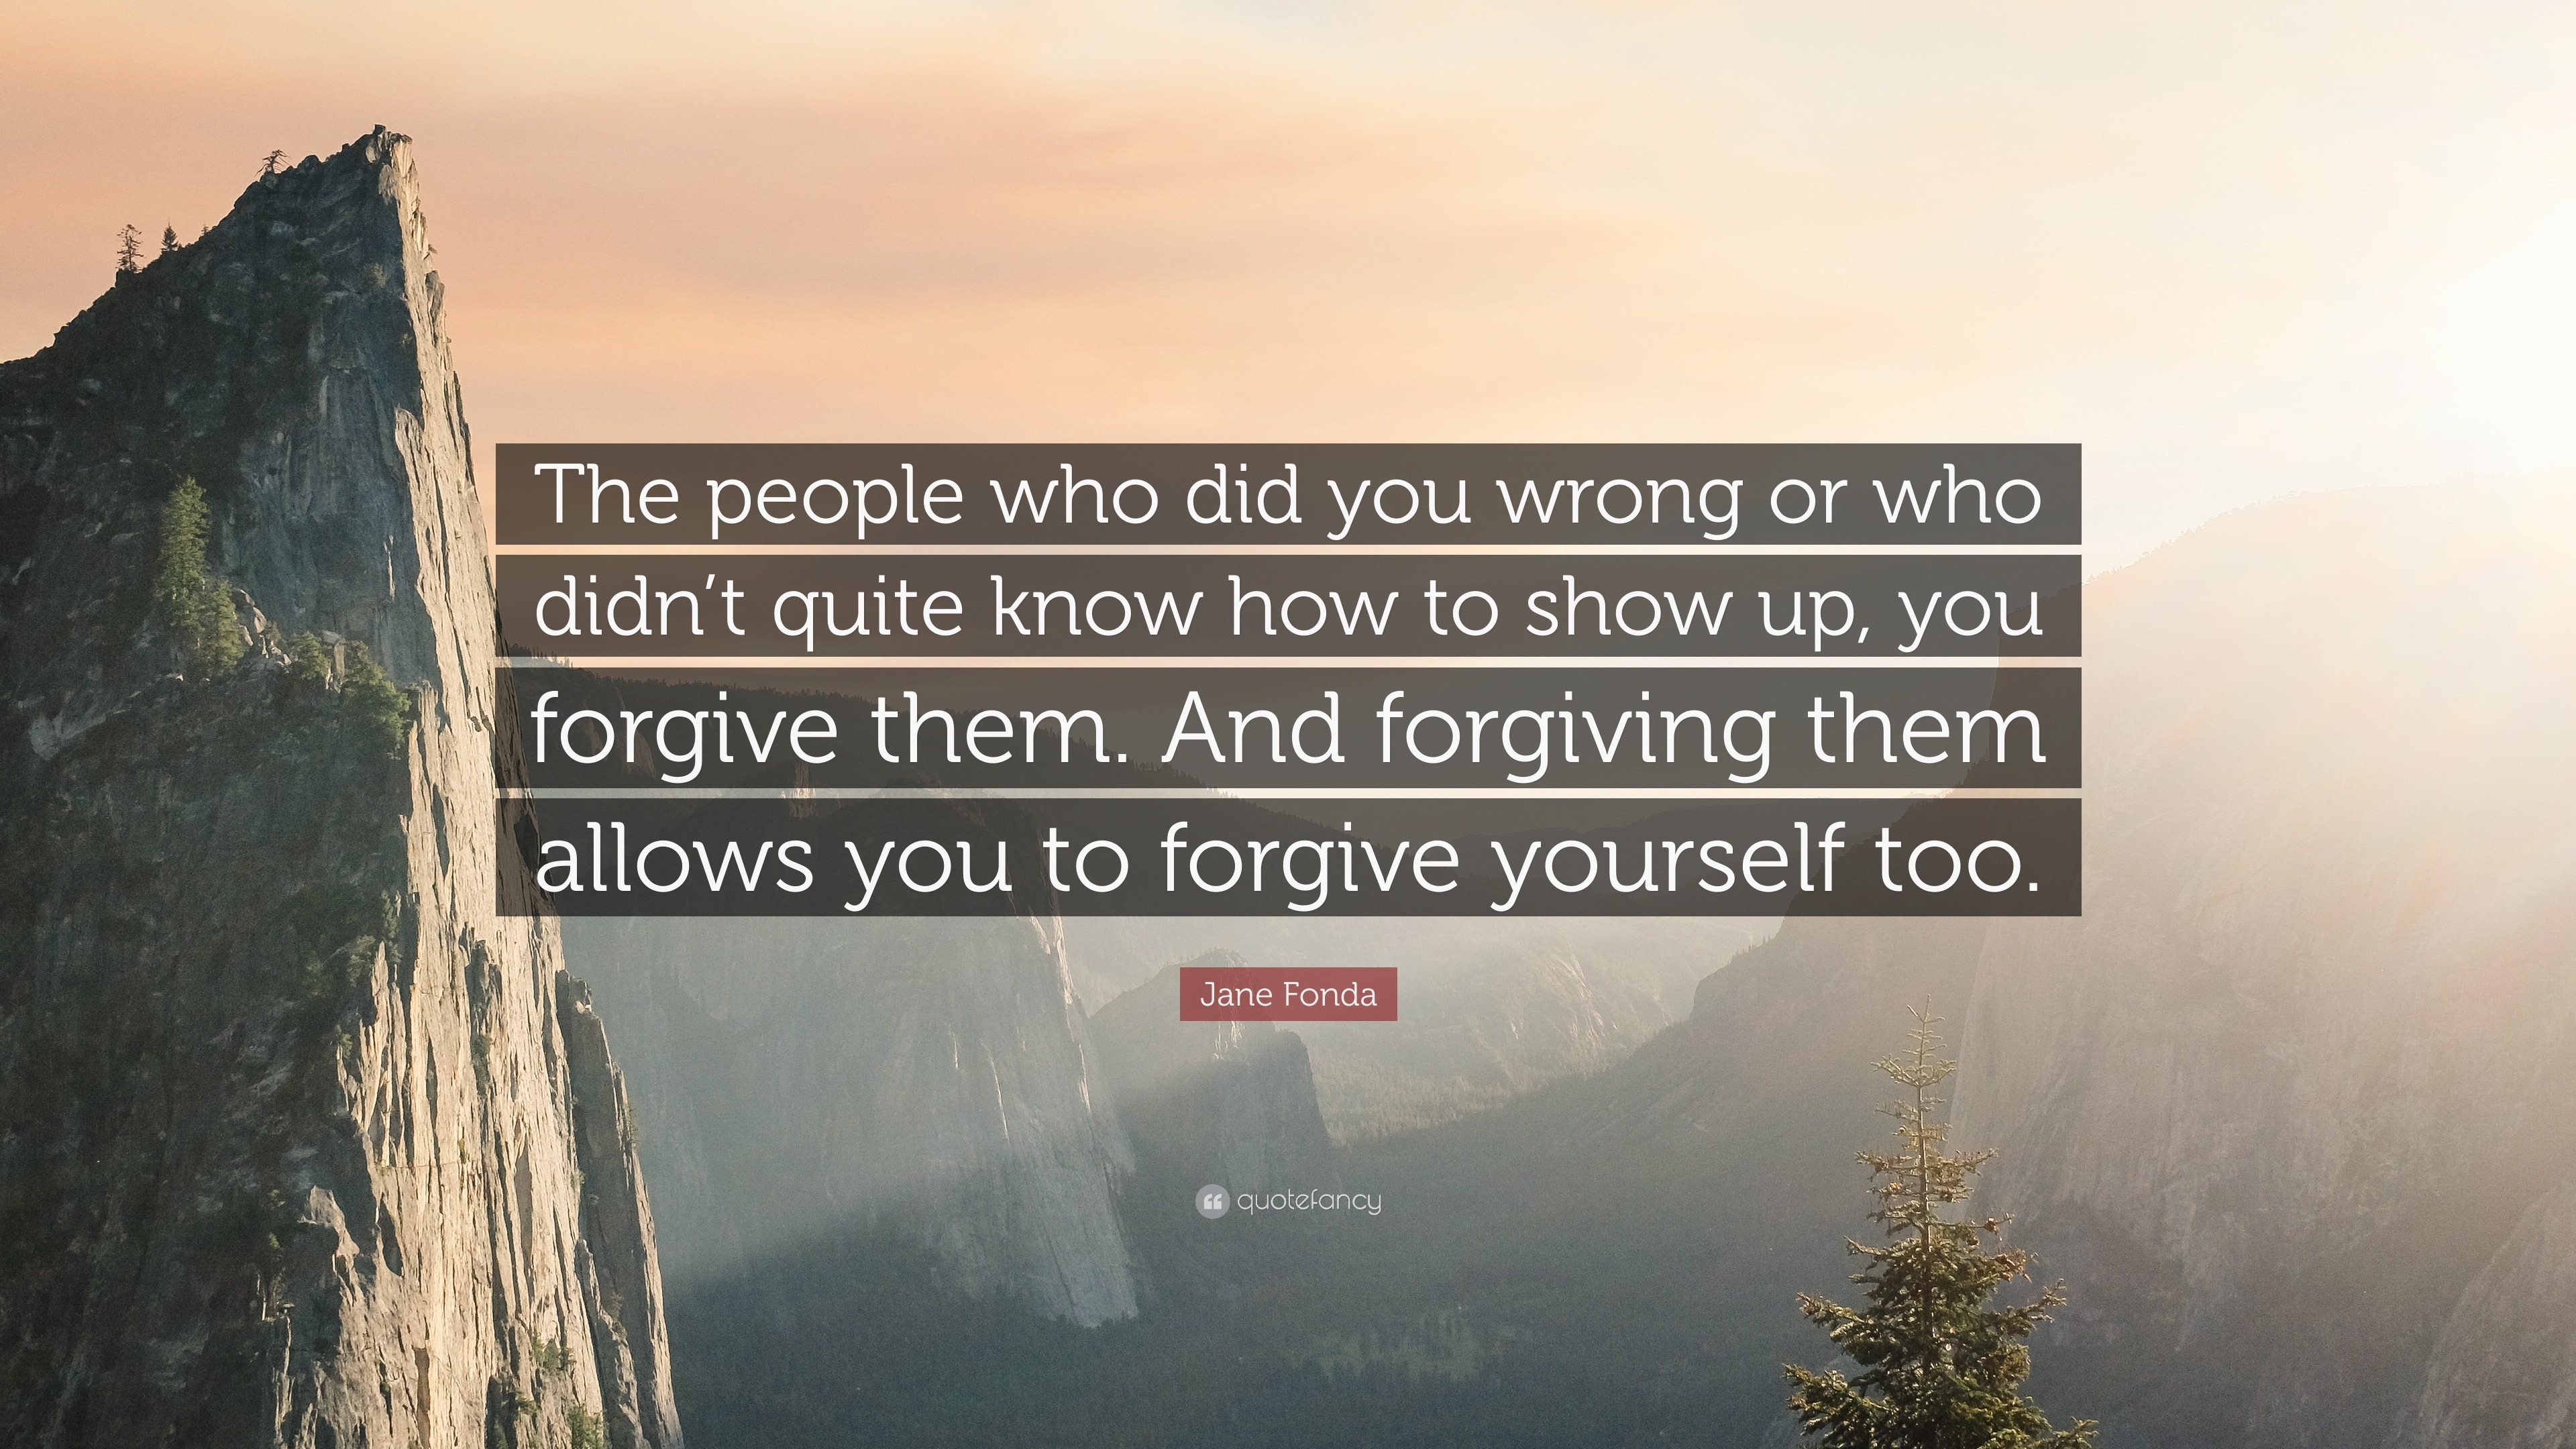 Jane Fonda Quote: “The people who did you wrong or who didn’t quite ...